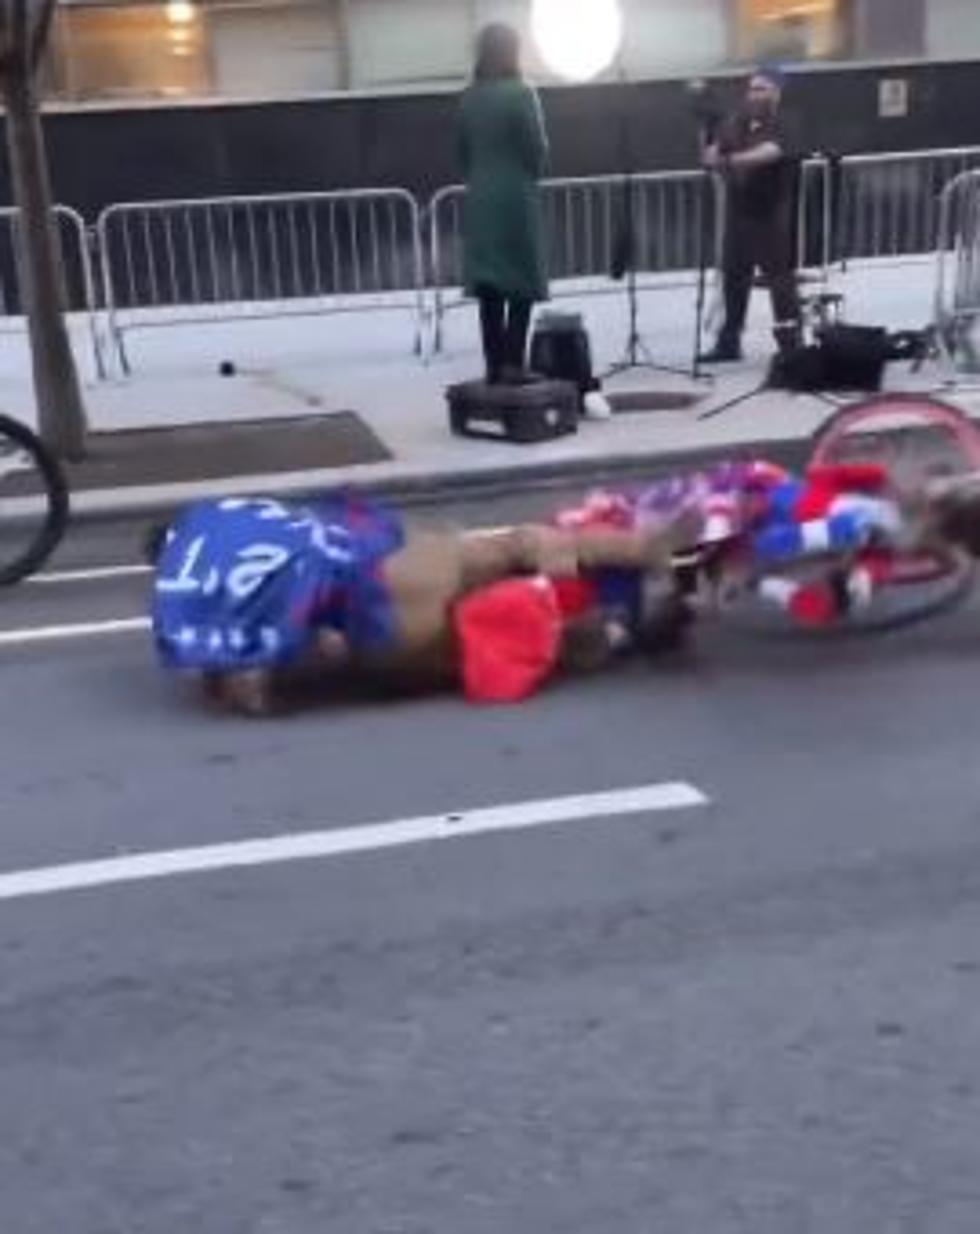 Man Poses As ‘QAnon Shaman’ on Bike in NYC & it Doesn’t End Well